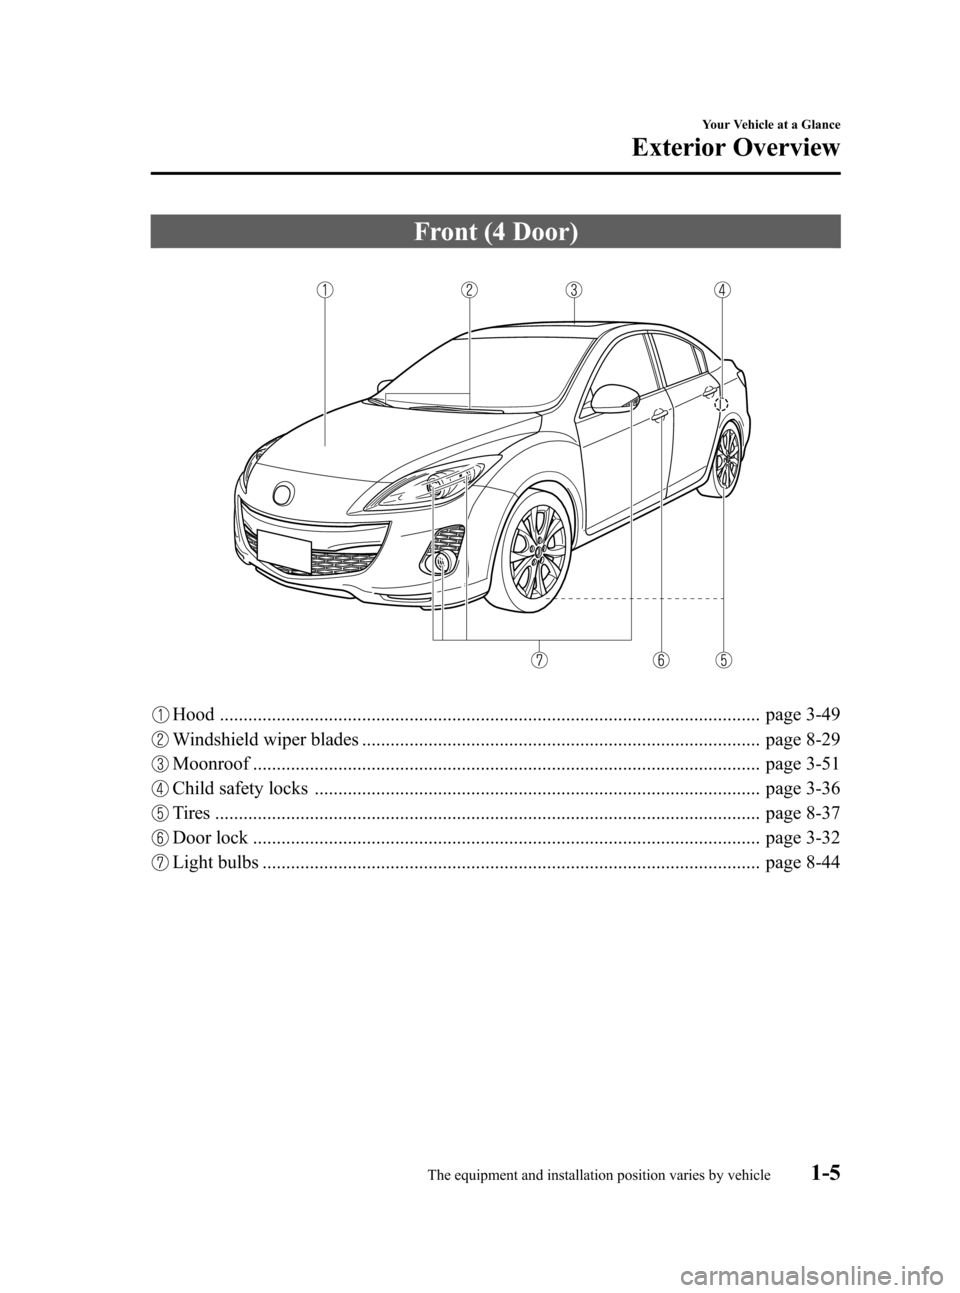 MAZDA MODEL 3 HATCHBACK 2012  Owners Manual (in English) Black plate (11,1)
Front (4 Door)
Hood .................................................................................................................. page 3-49
Windshield wiper blades ............